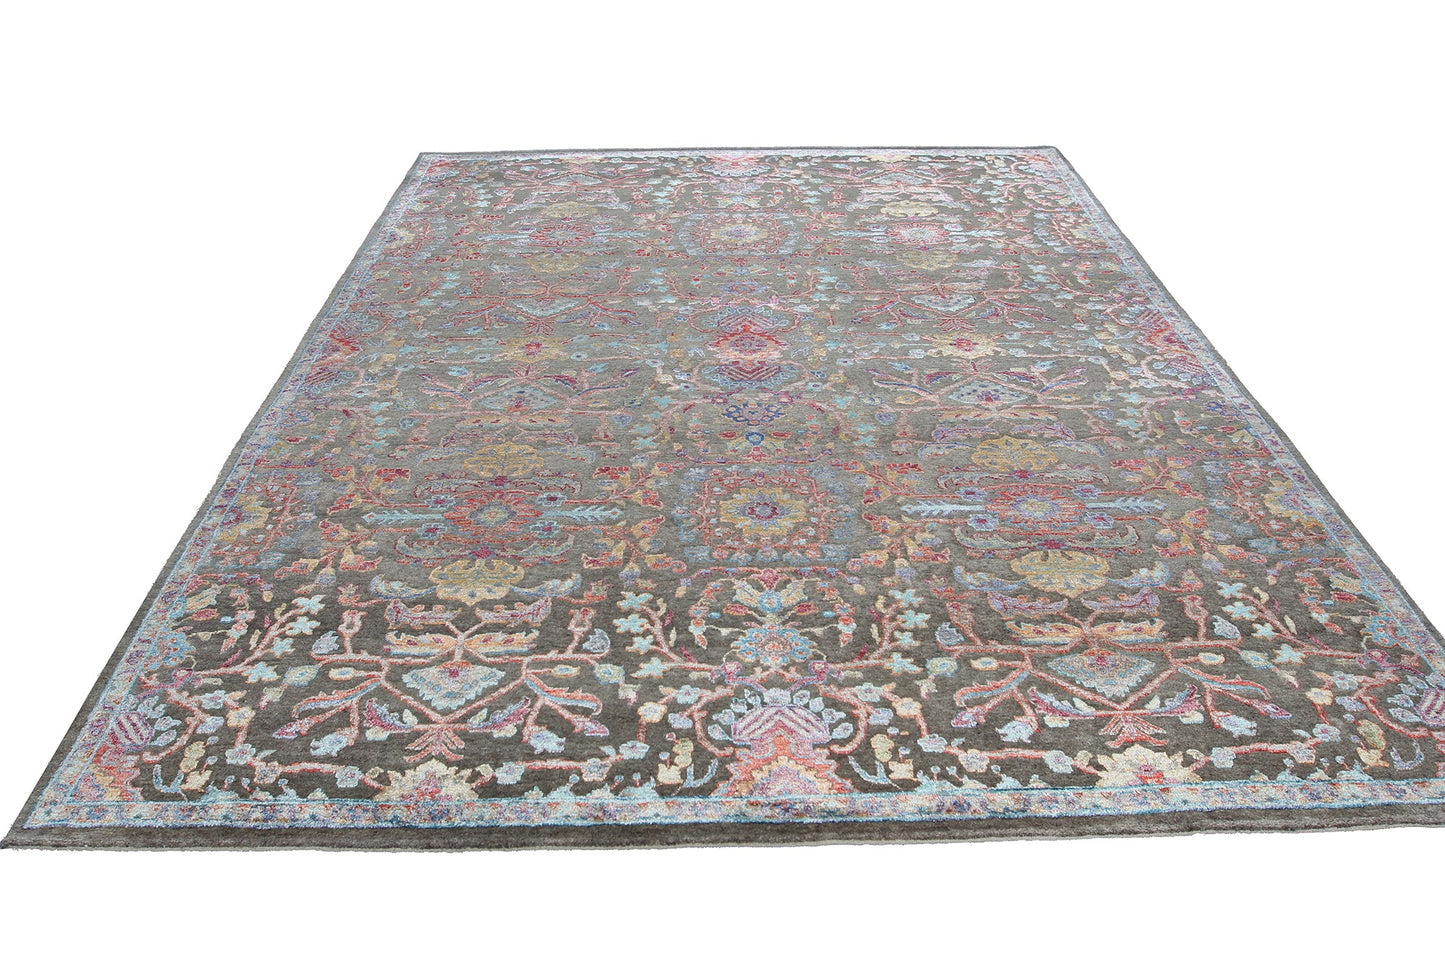 Modern Fine Hand-Knotted Wool & Silk Indian Carpet product image #27555860218026